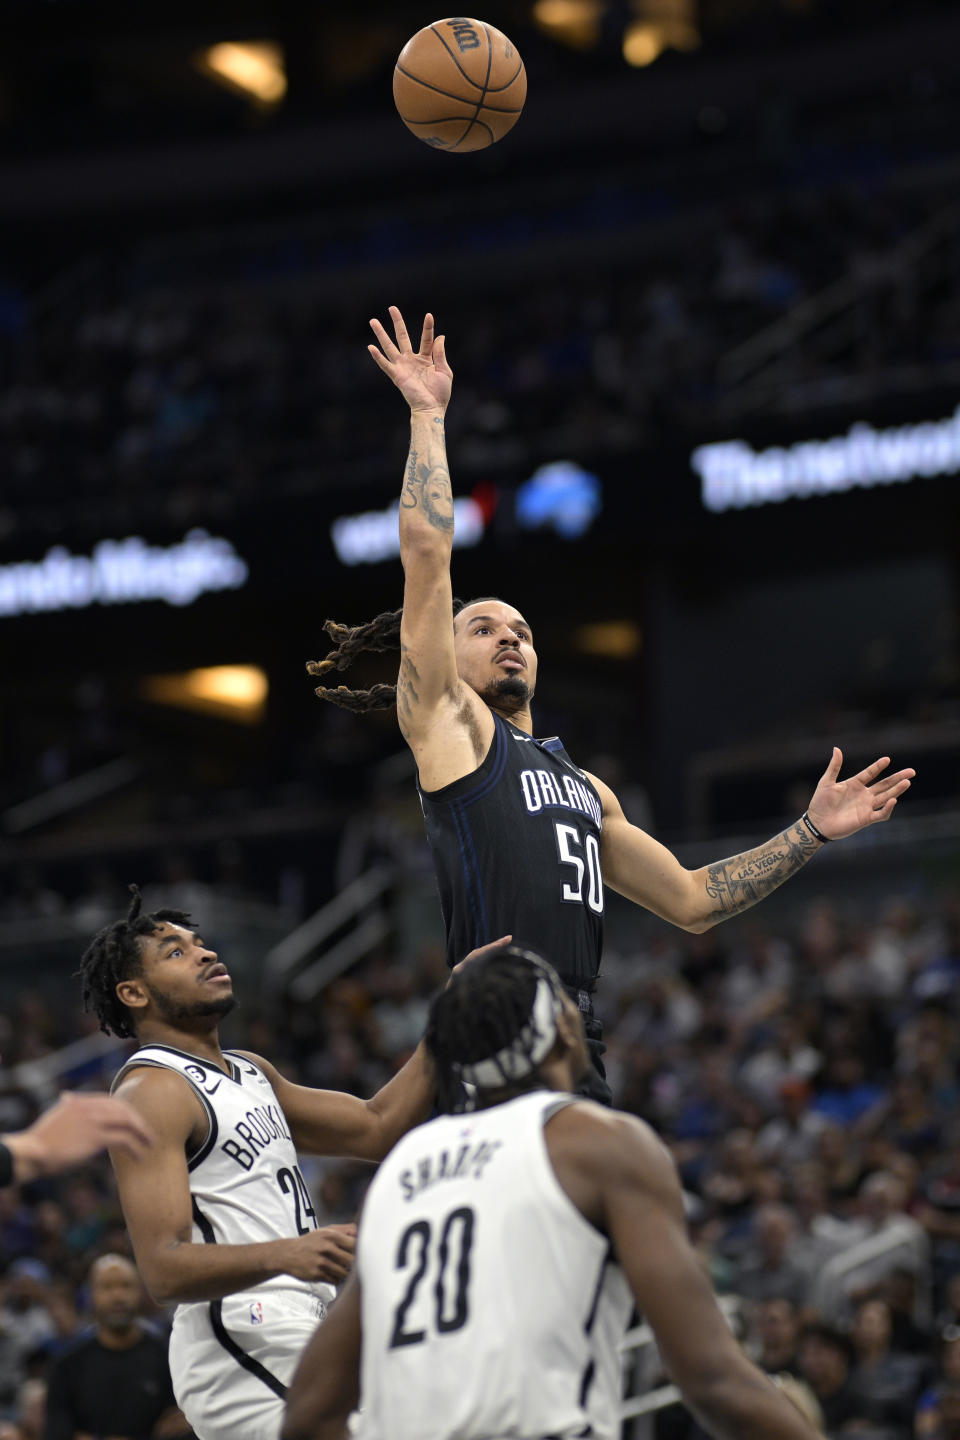 Orlando Magic guard Cole Anthony (50) goes up to shoot as Brooklyn Nets guard Cam Thomas (24) and center Day'Ron Sharpe (20) watch during the first half of an NBA basketball game, Sunday, March 26, 2023, in Orlando, Fla. (AP Photo/Phelan M. Ebenhack)